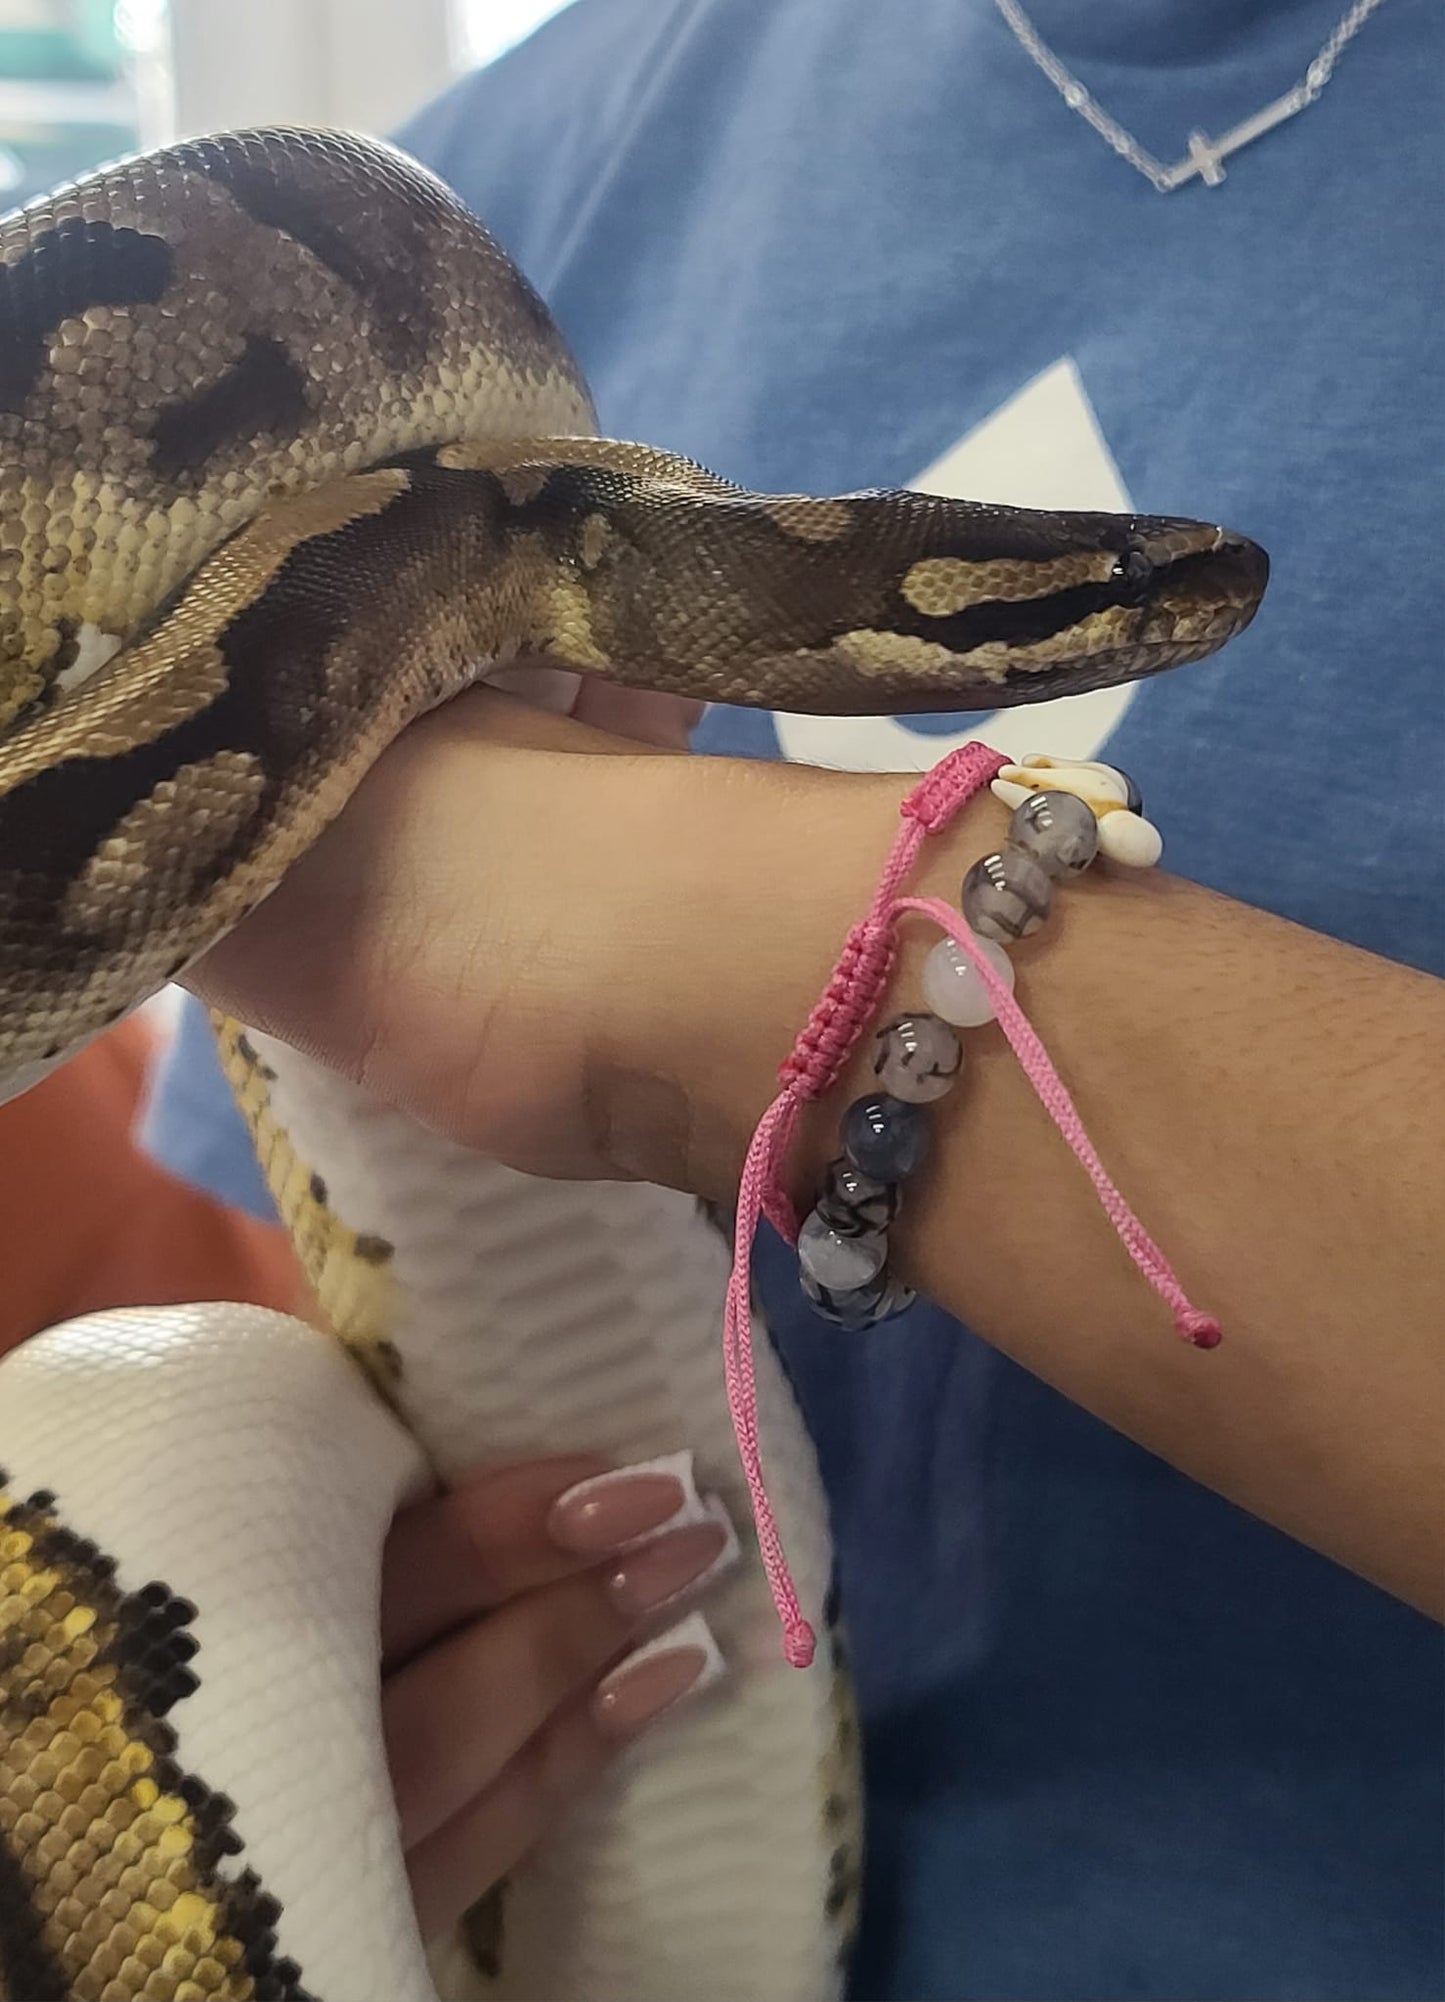 Hang Out with LIVE Reptiles & Paint Your Own 3D Printed Critter! - May 19th, 3-4:30p